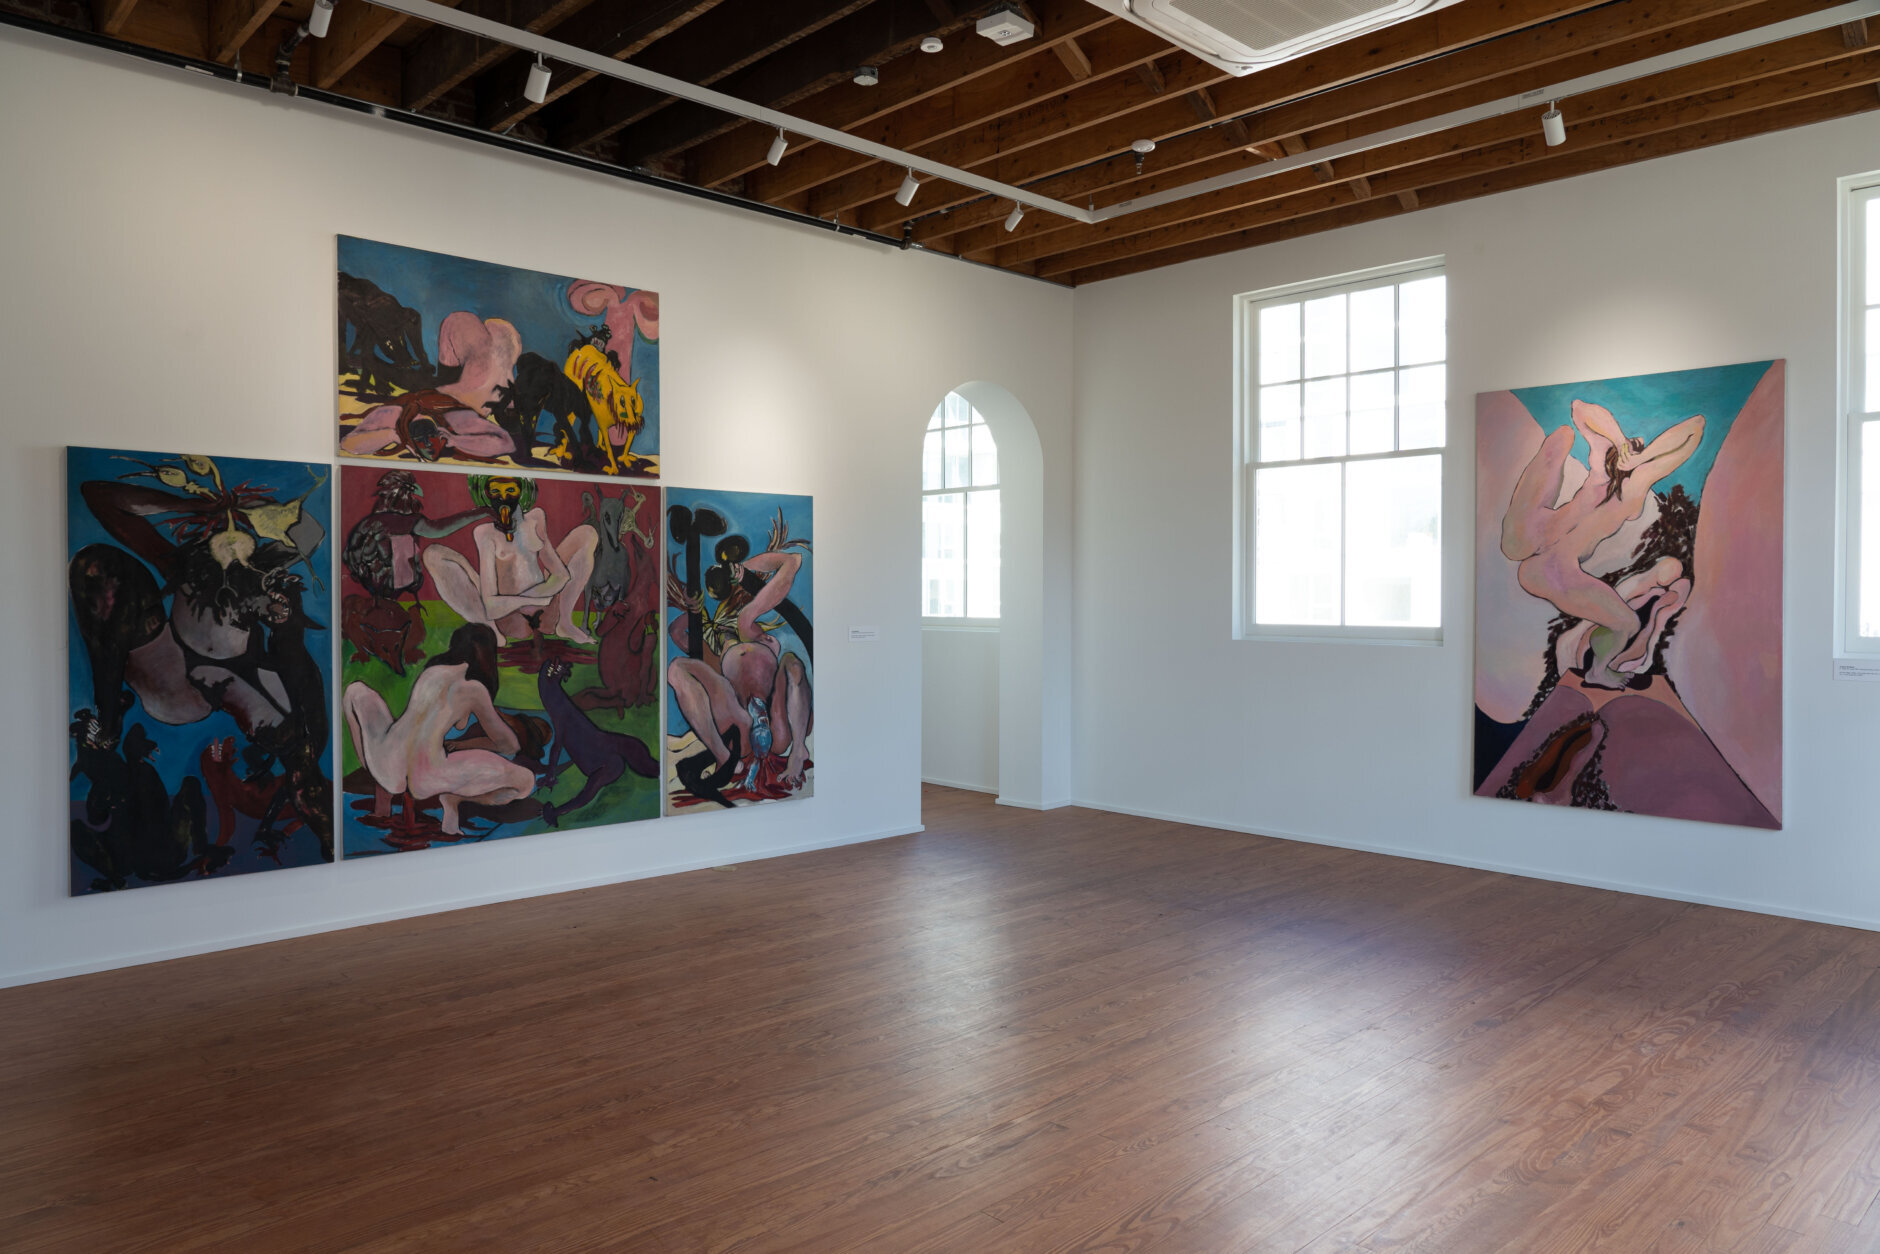 <p>Mera Rubell said the works they collect have stories to tell, and there&#8217;s a voice behind the works, just like in the Marvin Gaye exhibit.</p>
<p>Don Rubell said they hope this museum, which includes D.C. artists, will help newer artists make a name for themselves.</p>
<p>“D.C. has a long history of talent, not always recognized elsewhere, and I think it would be nice if we can help the ecosystem, so artists here have the chance to get known,” Don Rubell said.</p>
